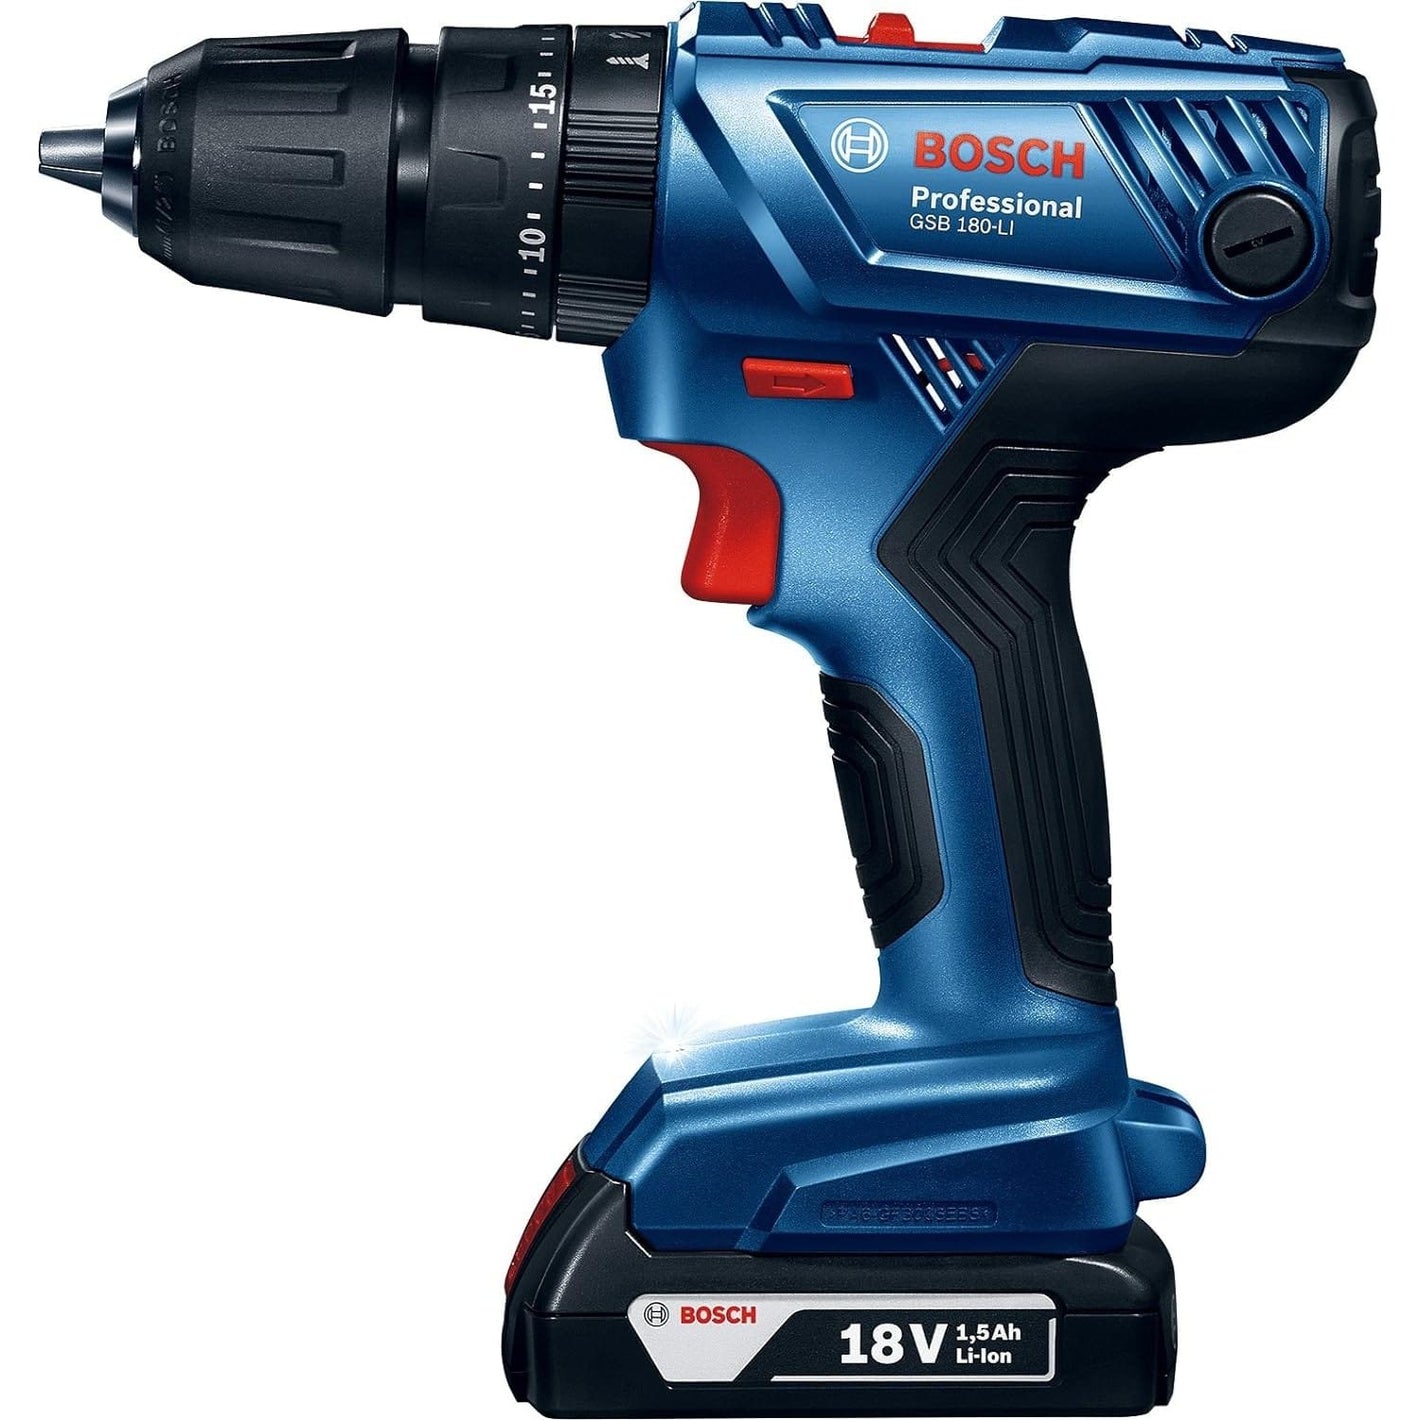 Bosch Lithium-Ion Cordless Impact Drill 18V with Two Batteries - GSB180-LI